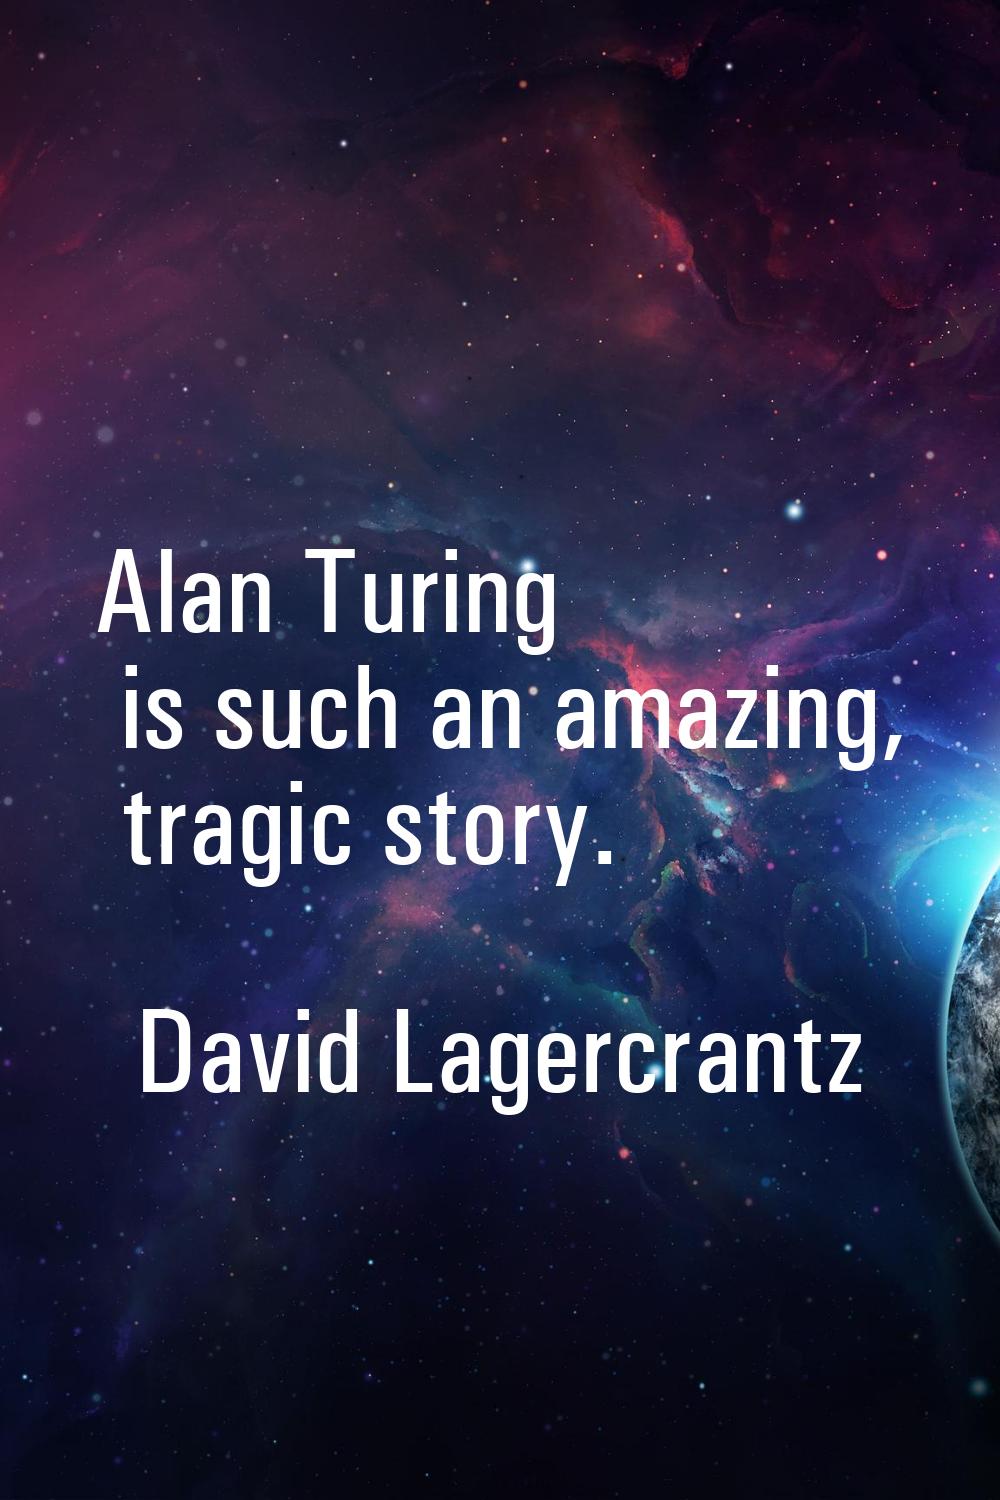 Alan Turing is such an amazing, tragic story.